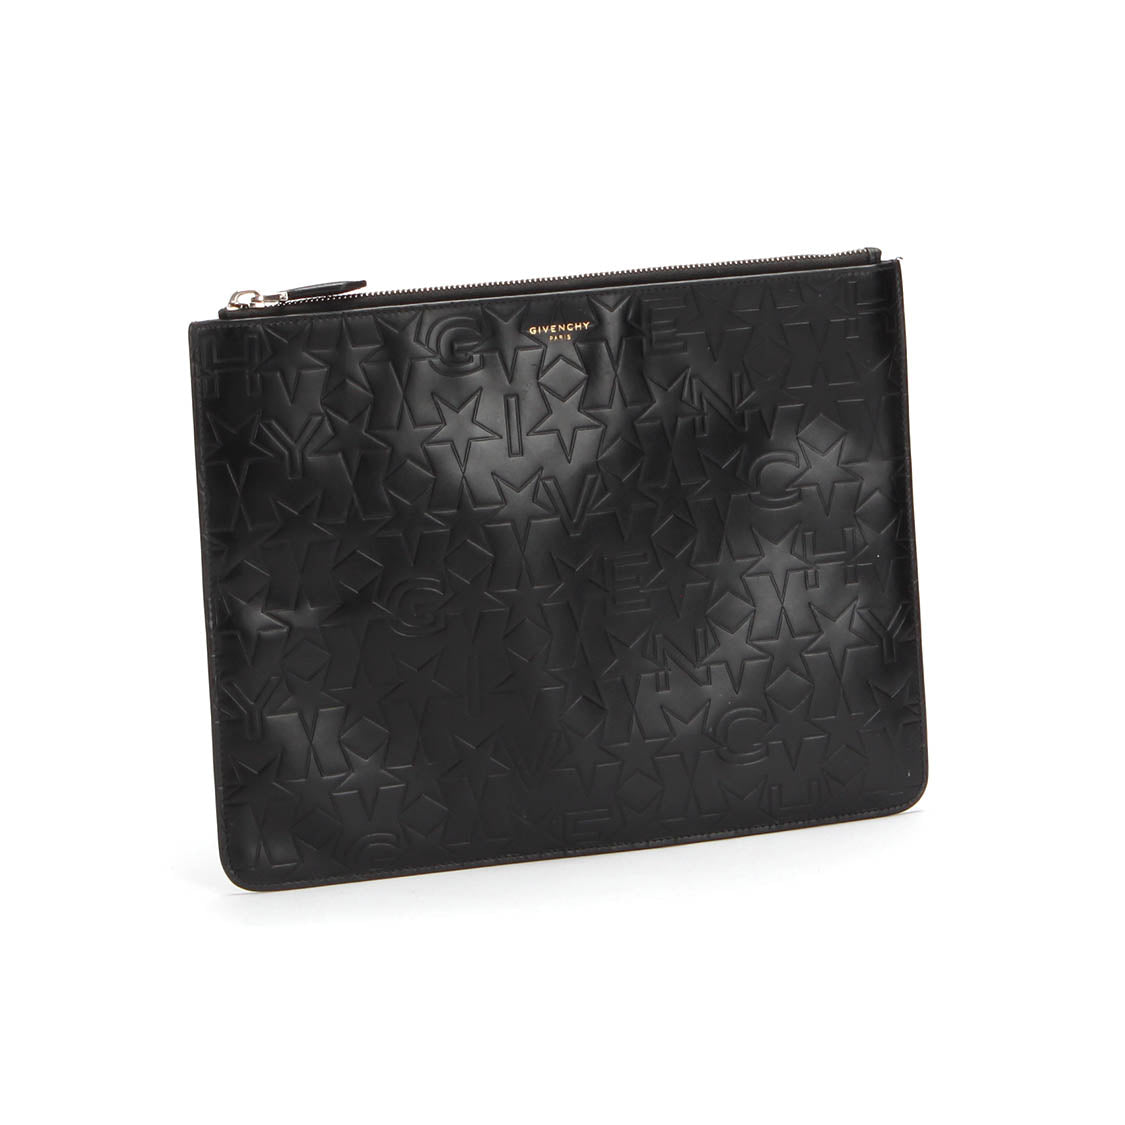 Star Embossed Leather Clutch Bag